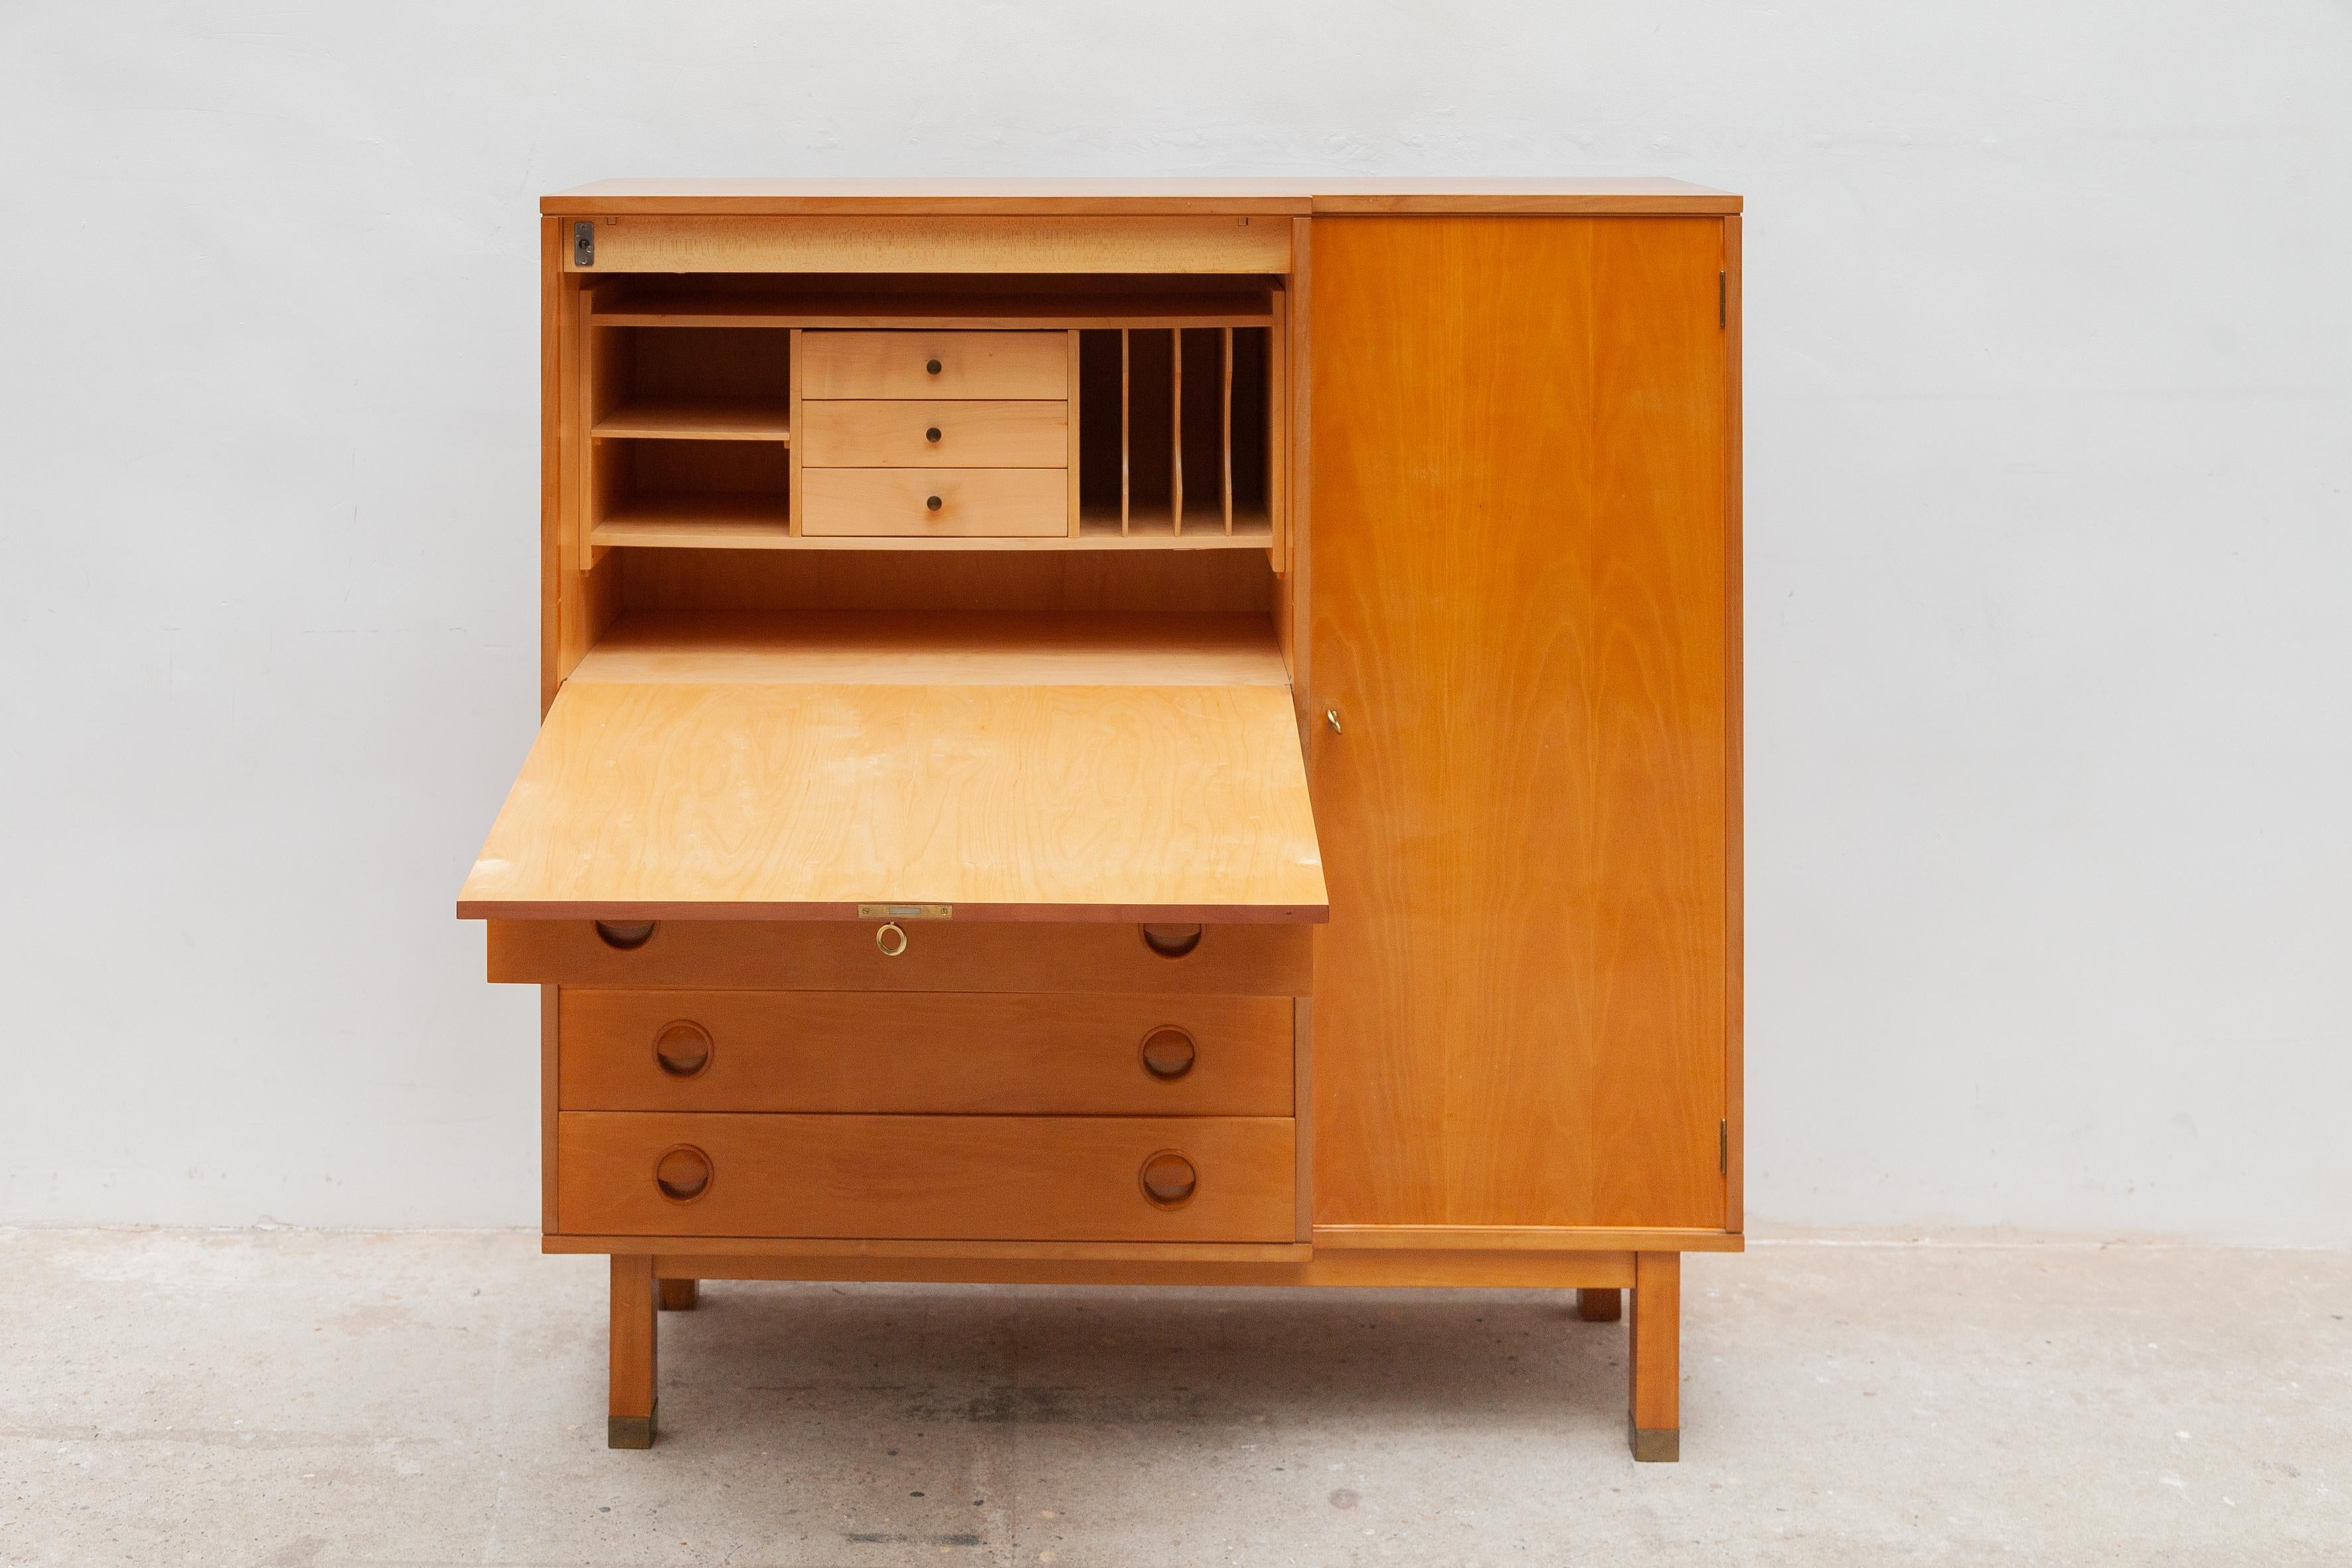 Vintage Mid-Century Modern desk sideboard, bureau secretaire.The honey-colored sideboard desk has been made of an ash veneer wood and brass feet. It contains plenty of storage space an open storage space with an integrated filing desk to organize